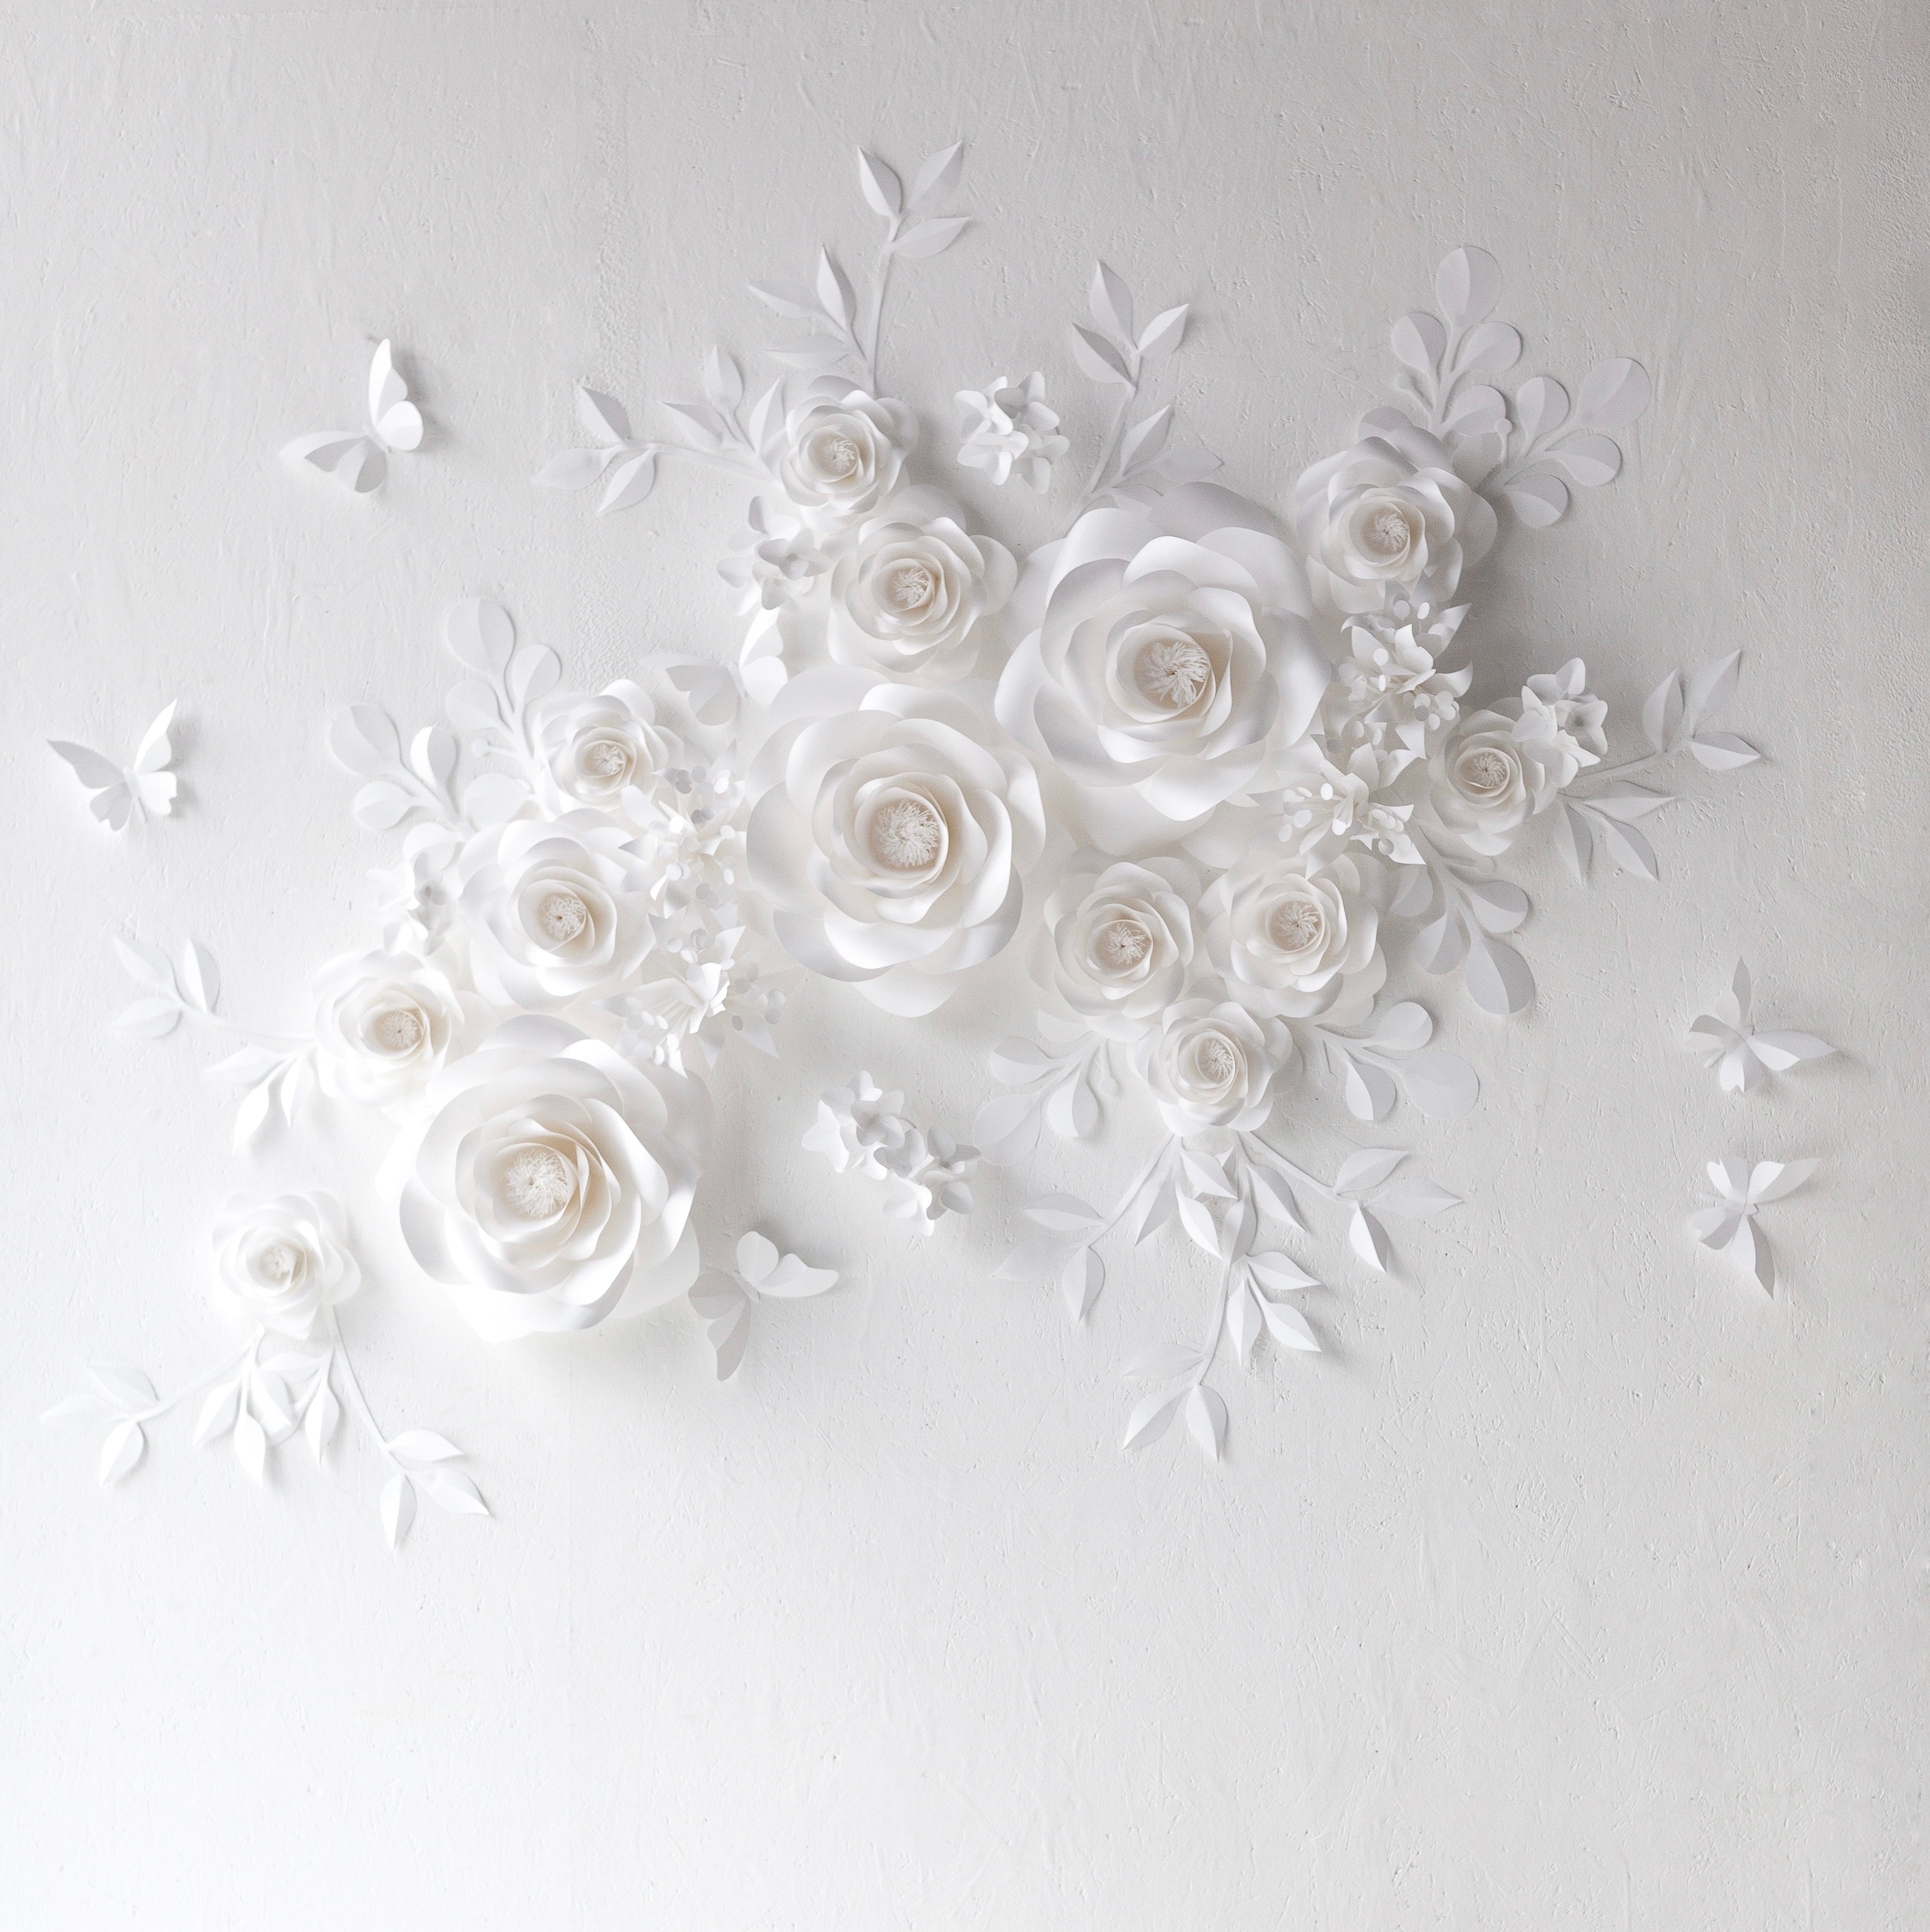 White 3D Paper Flowers Decorations for Wall Decor, Wedding, Nursery (3  Pieces)